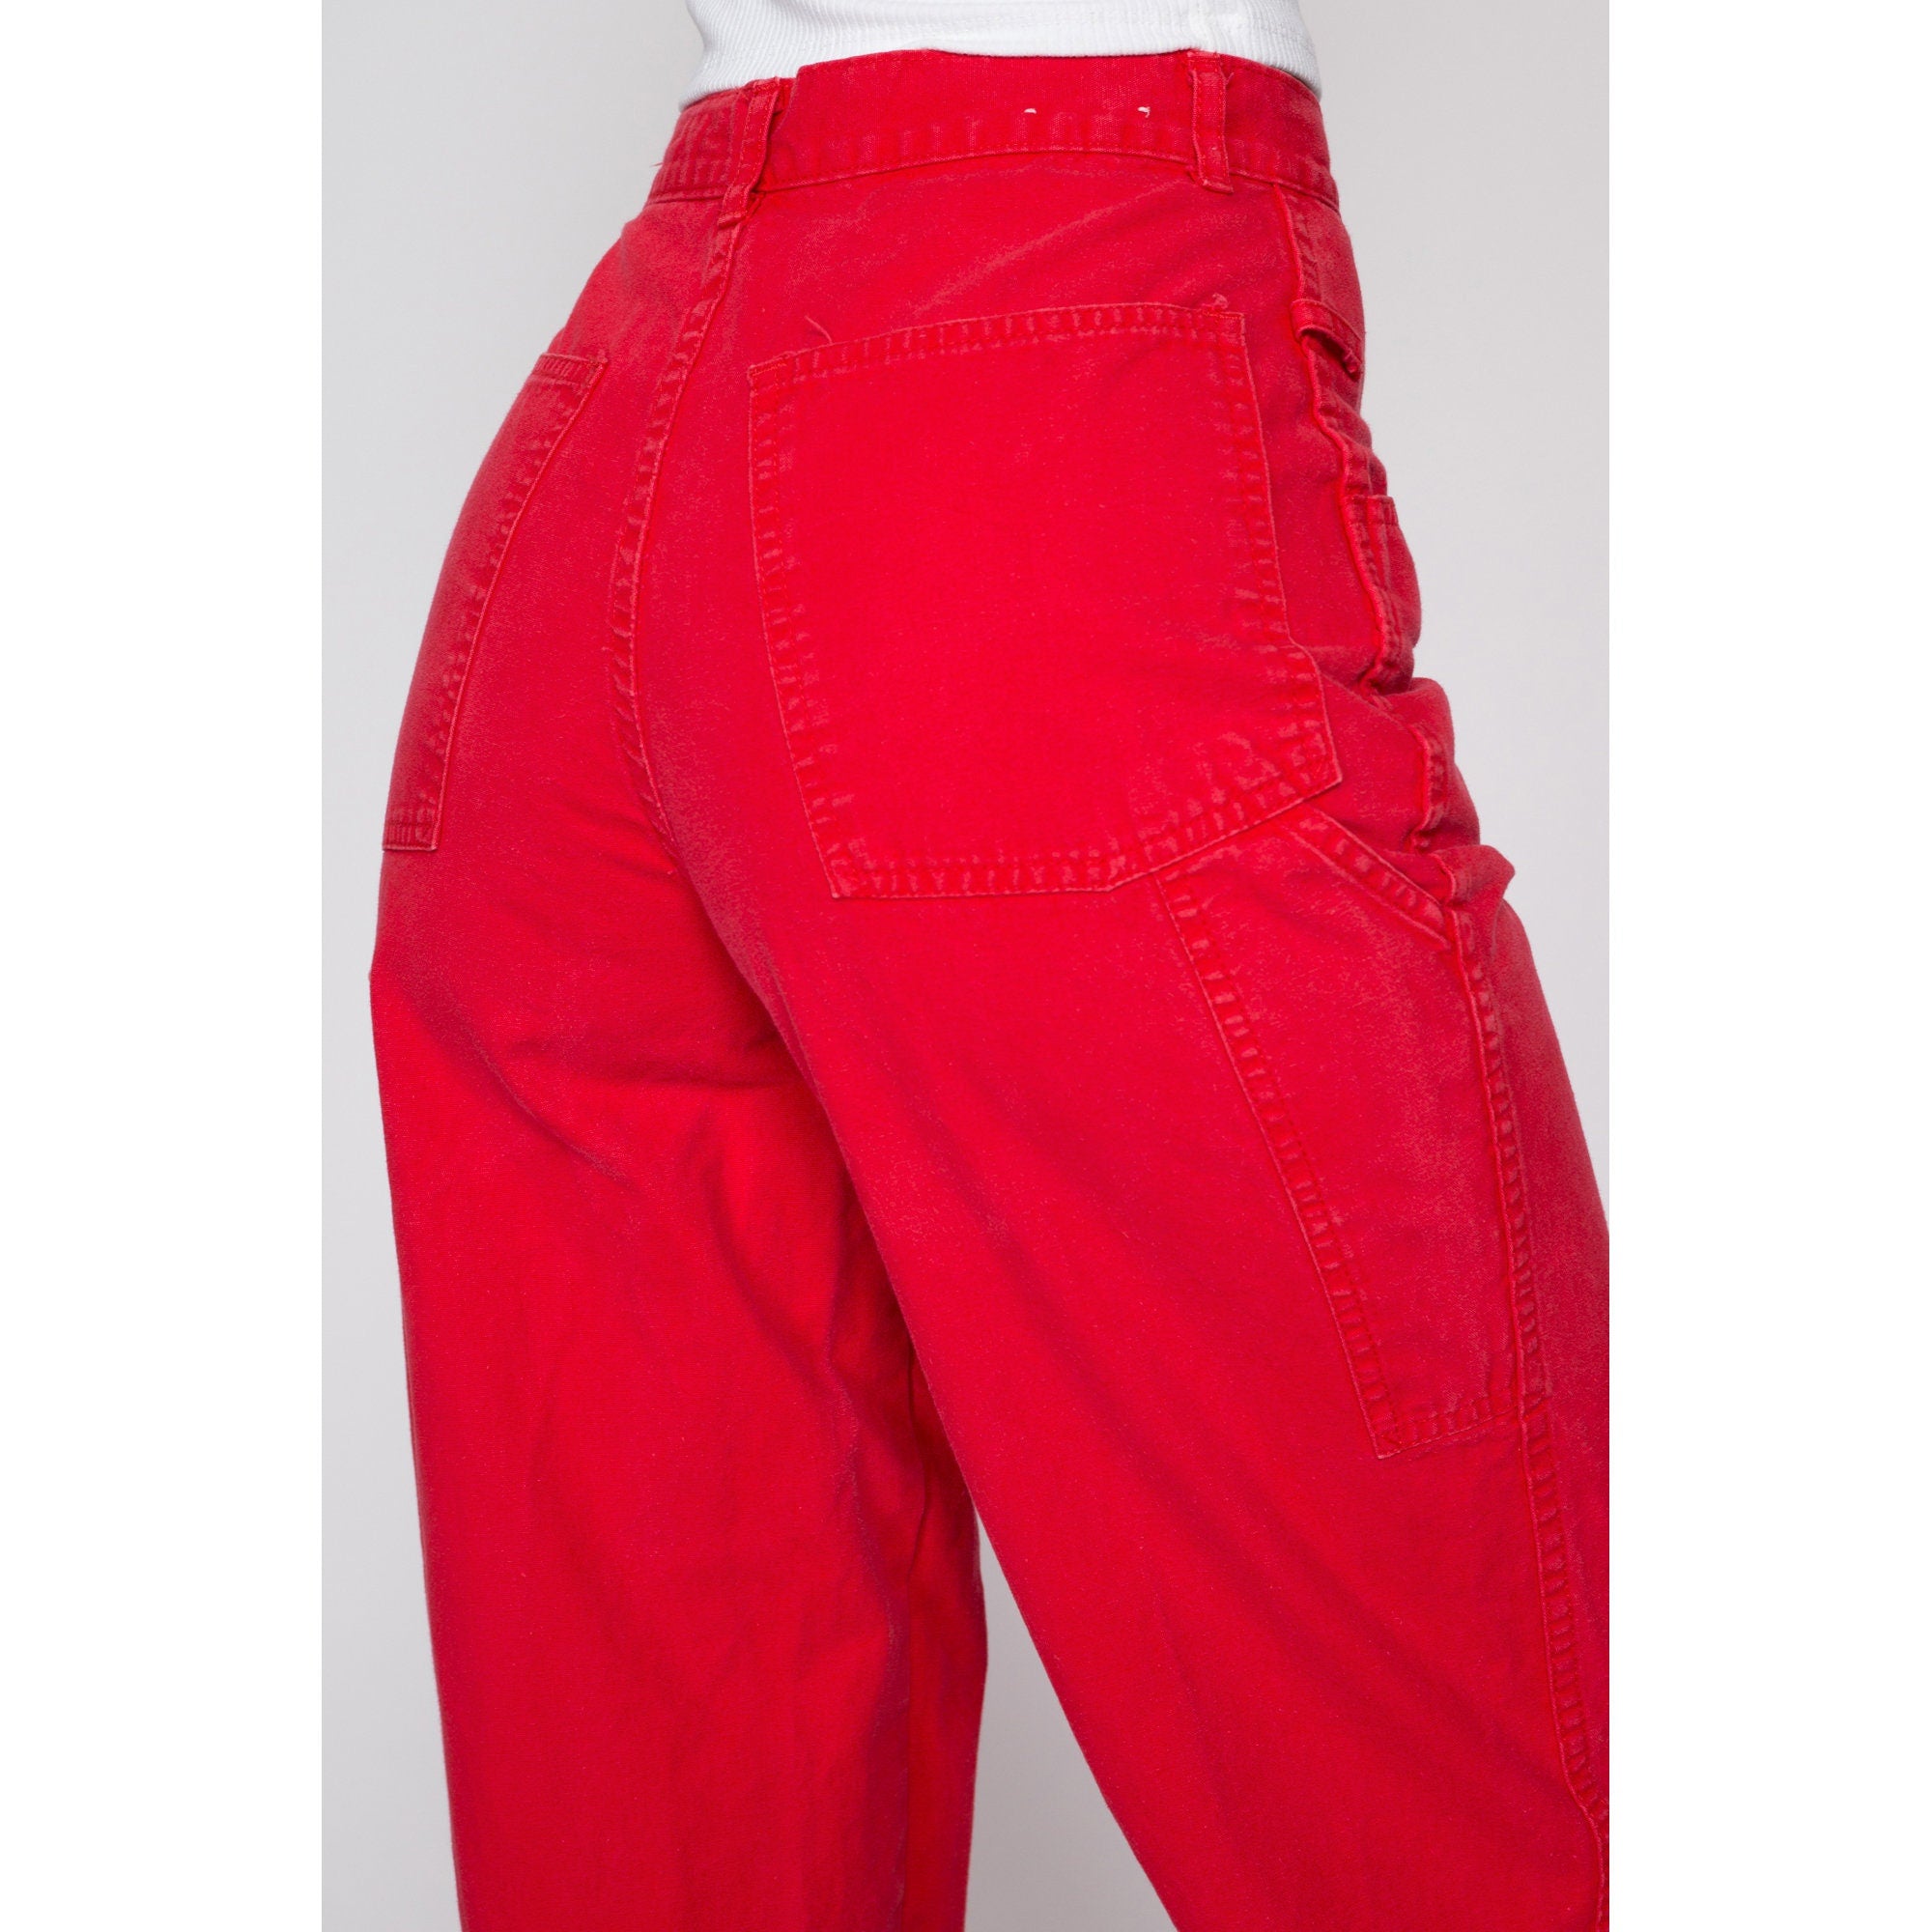 Buy Imara Red Solid Straight Pant online